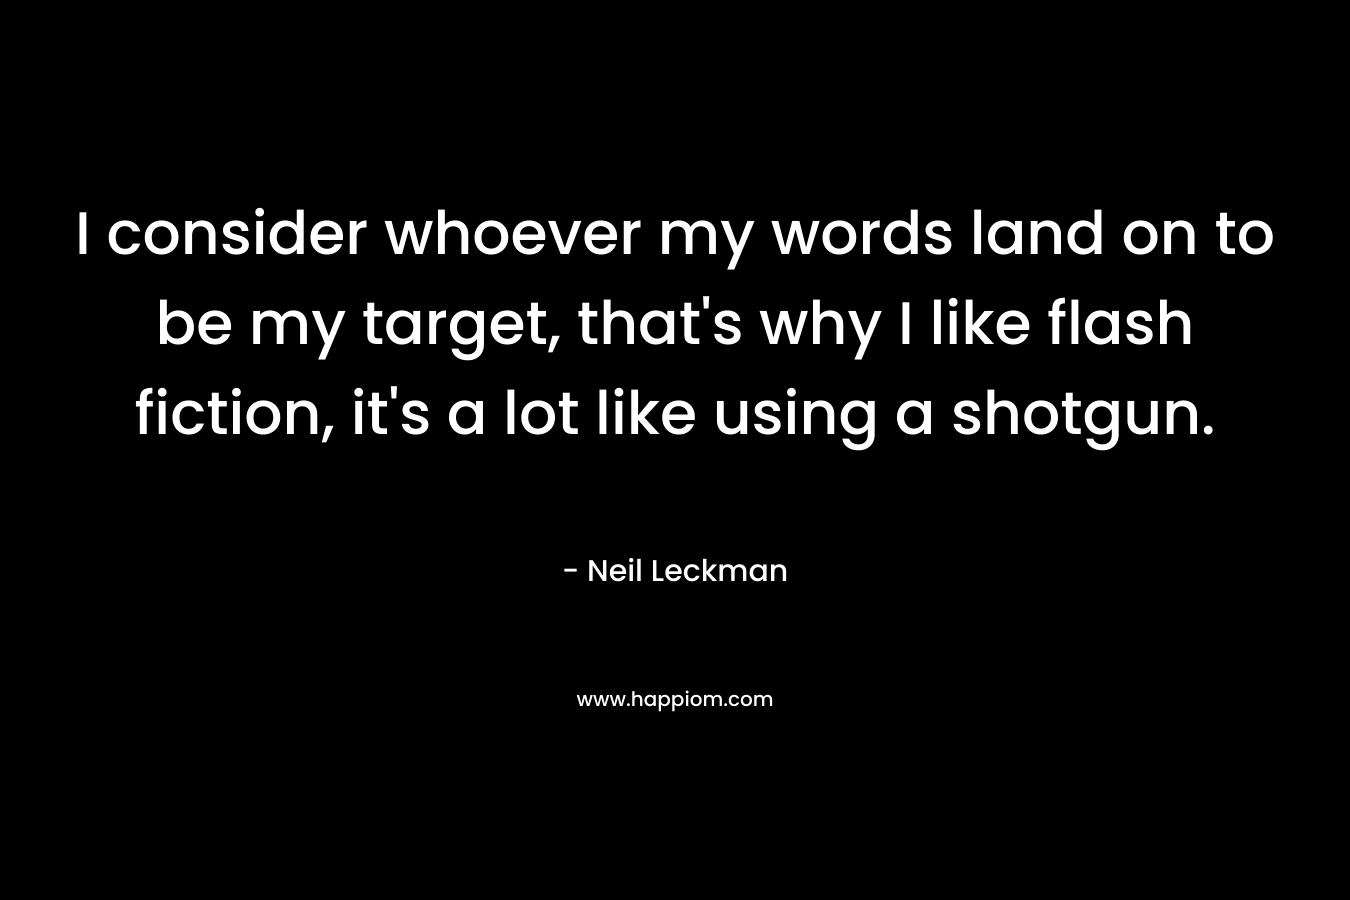 I consider whoever my words land on to be my target, that’s why I like flash fiction, it’s a lot like using a shotgun. – Neil Leckman